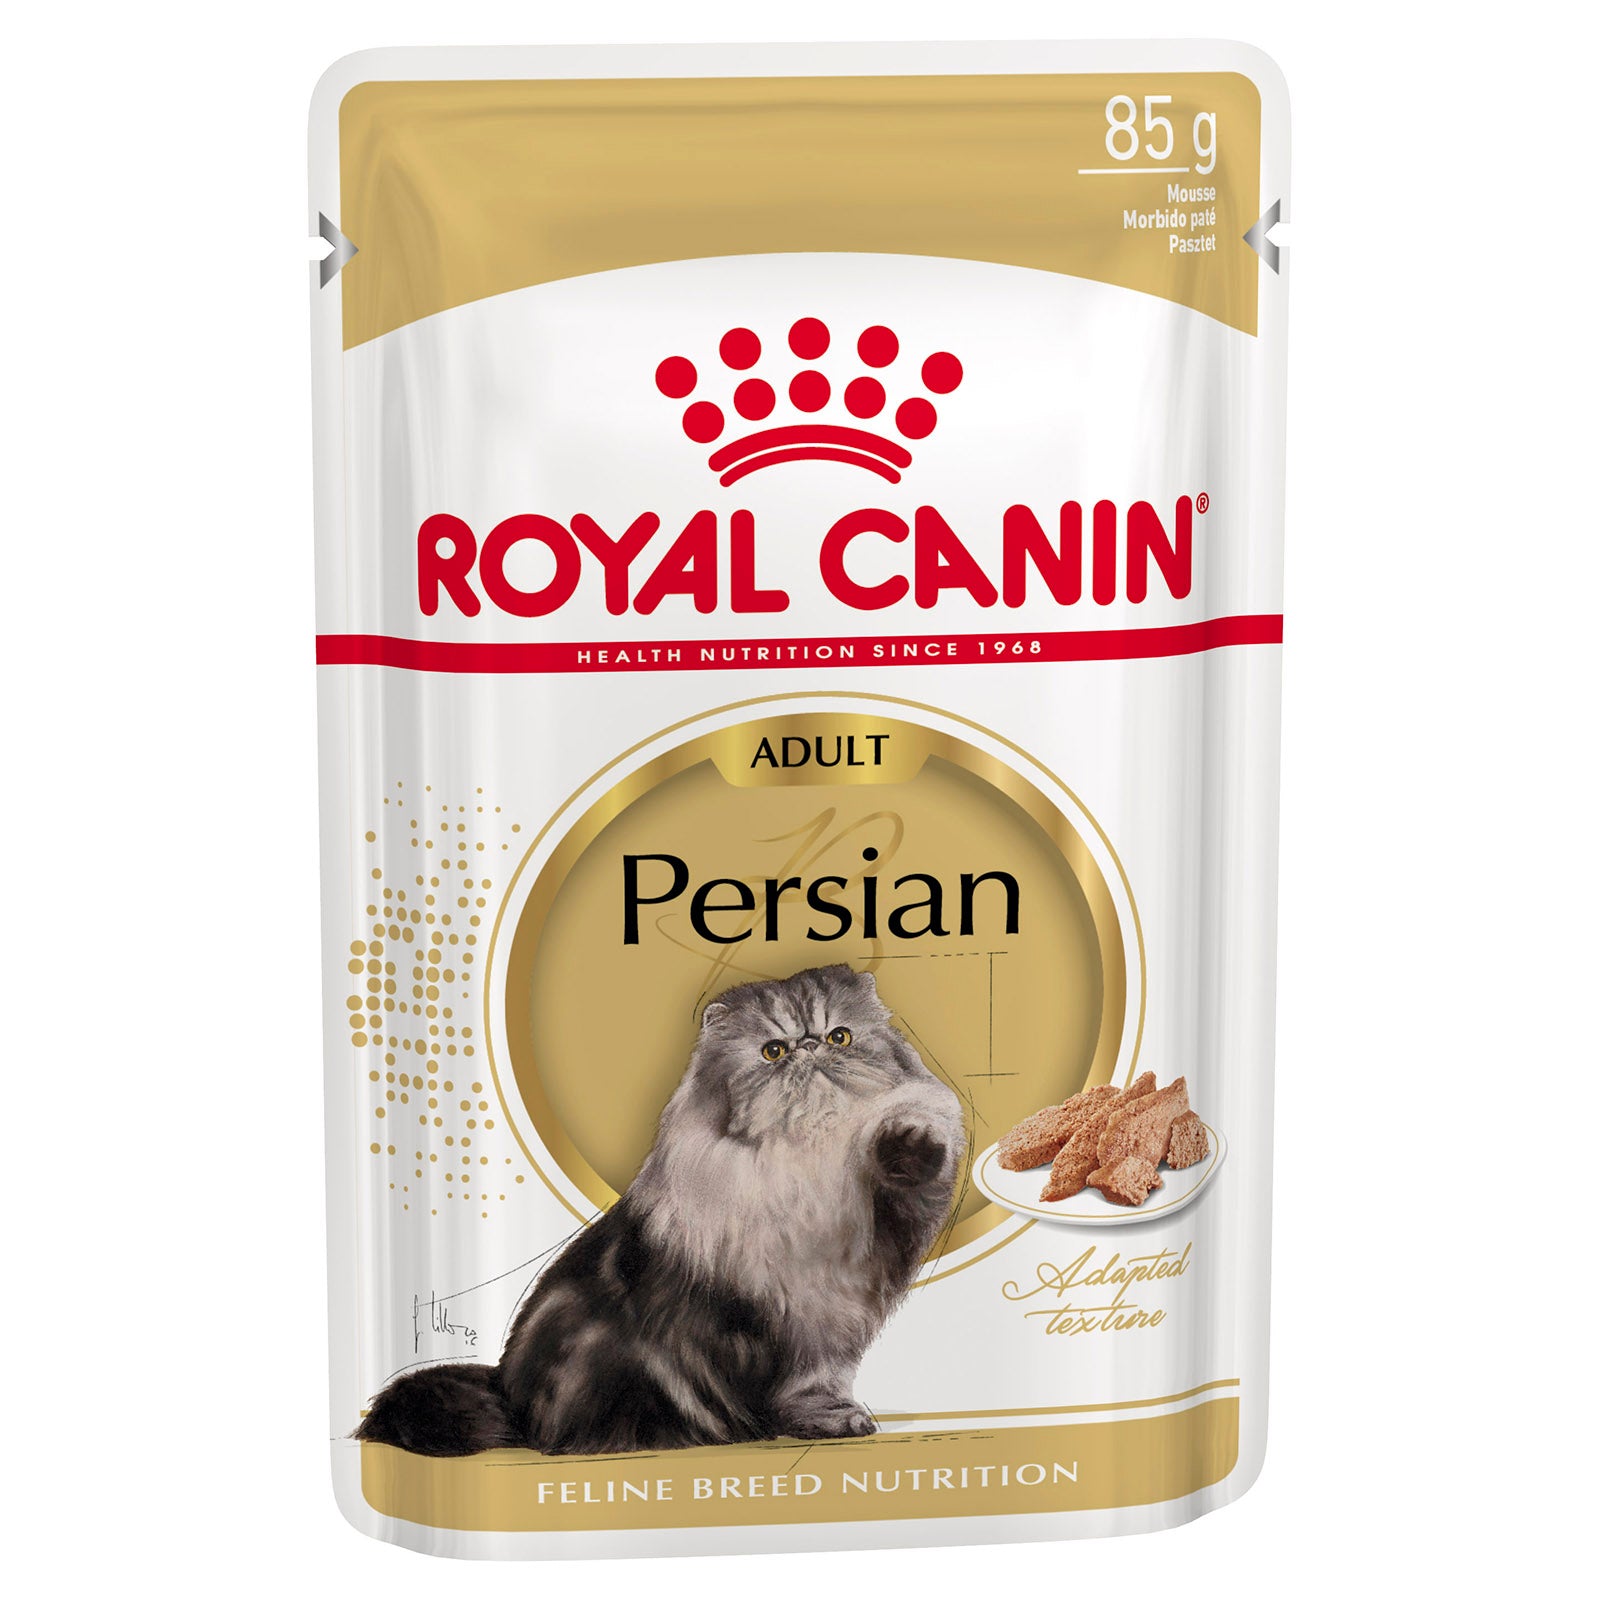 Royal Canin Cat Food Pouch Adult Persian